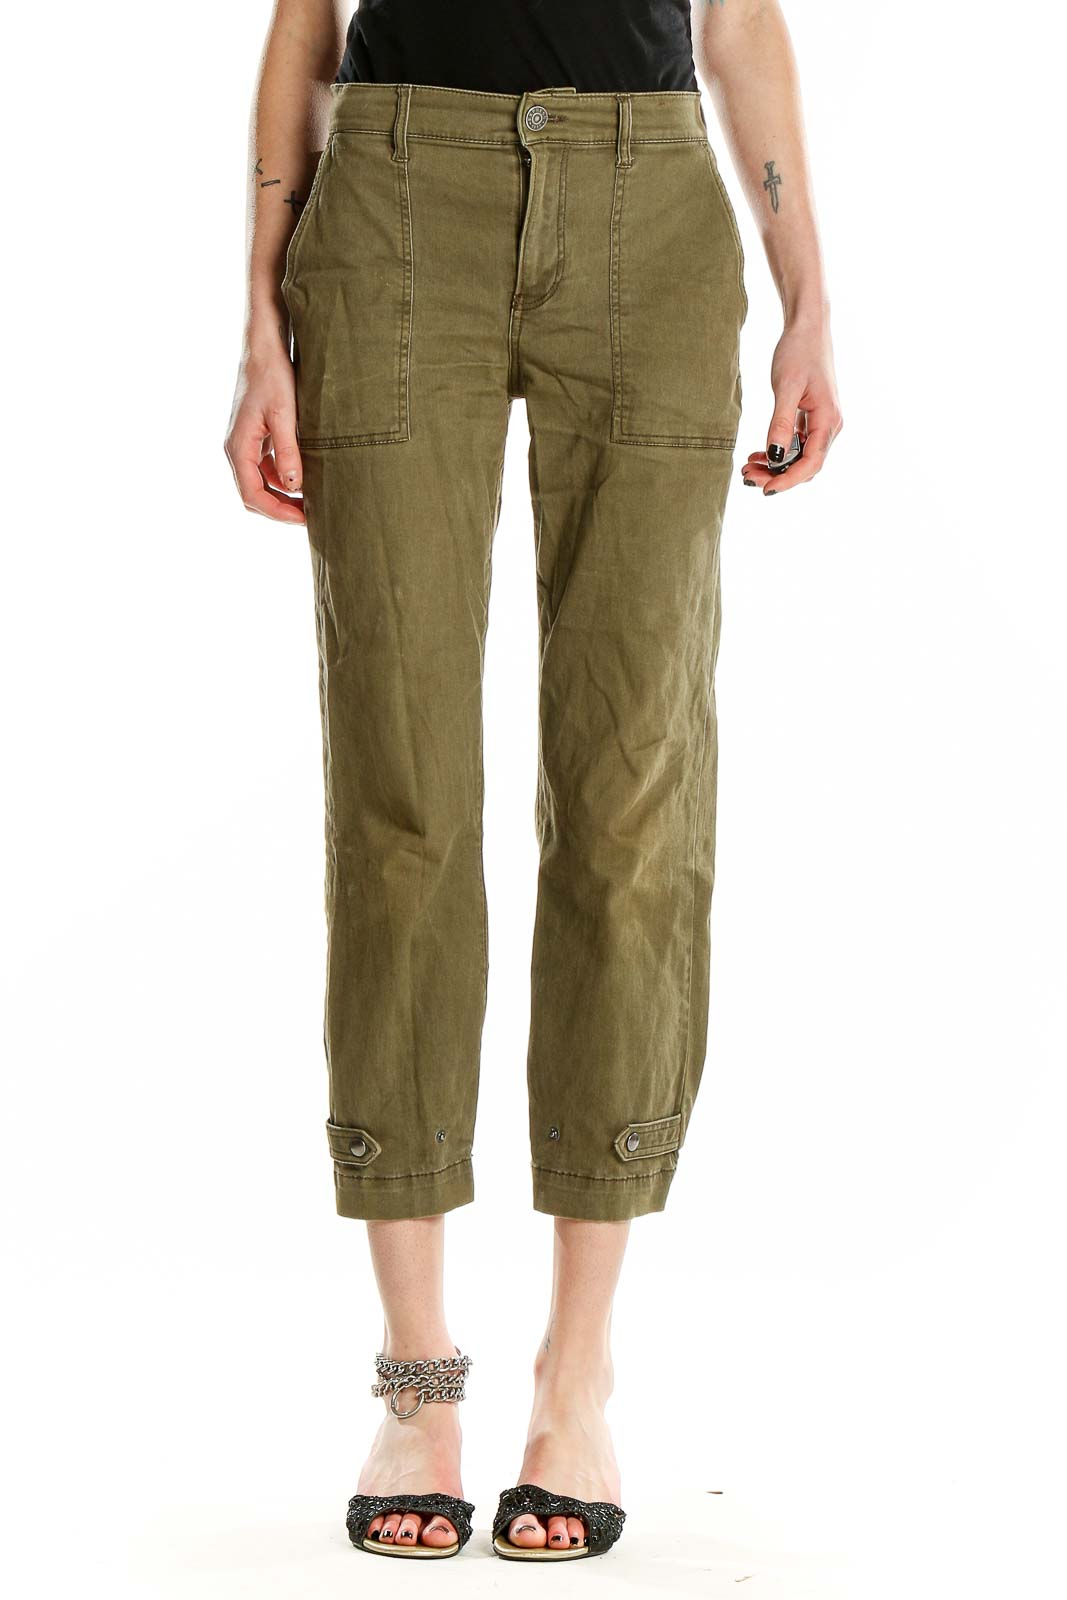 Green Cropped Cargos Pants Front